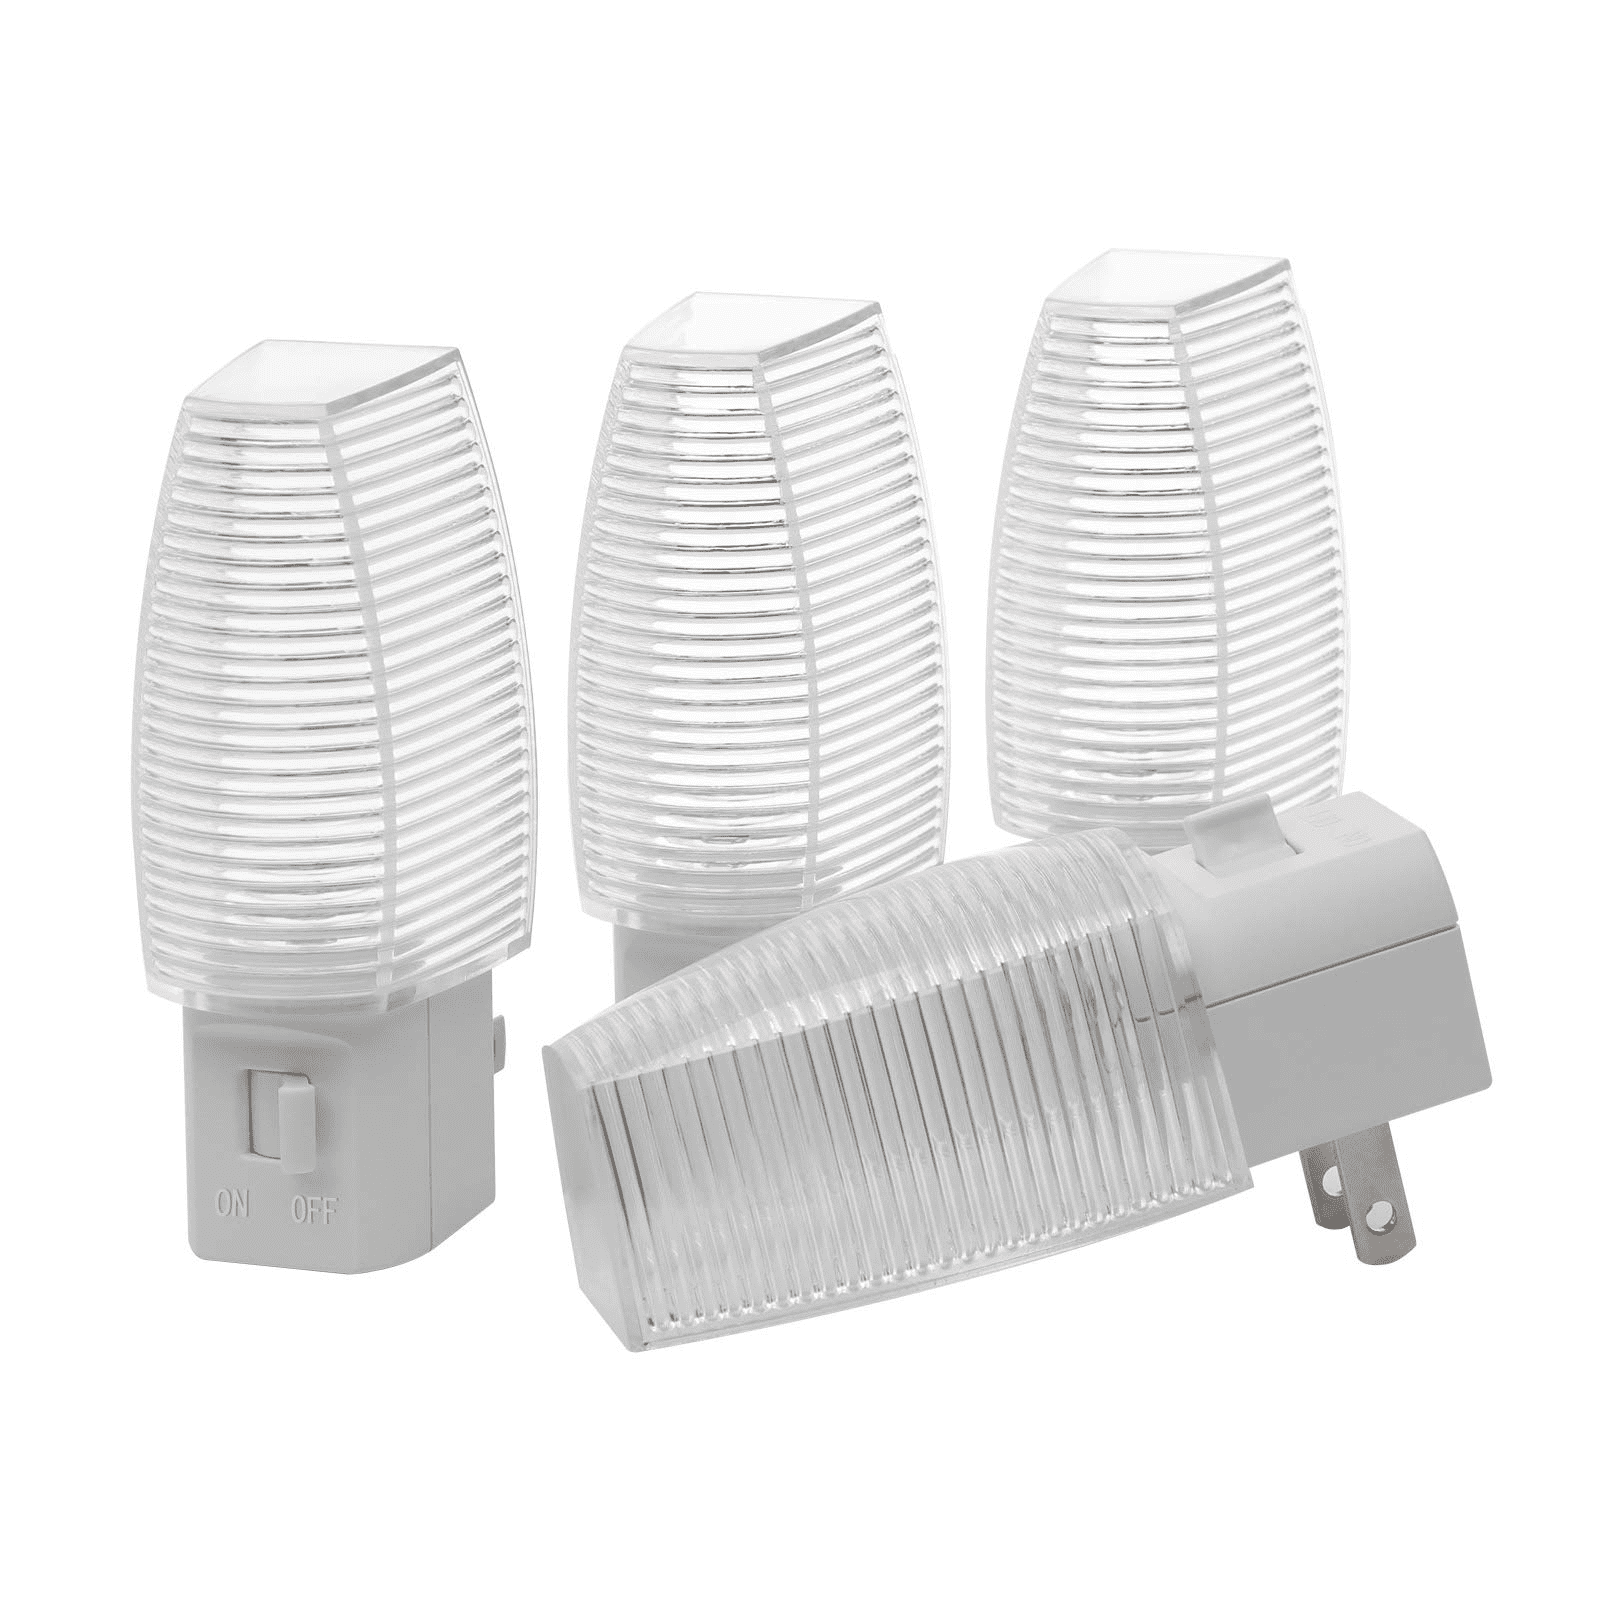 4-Pack Warm Light Stairs Plug for Night Bathroom,Hallway, White in LED DEWENWILS with Switch, Kids Manual Lights Night Bedroom,